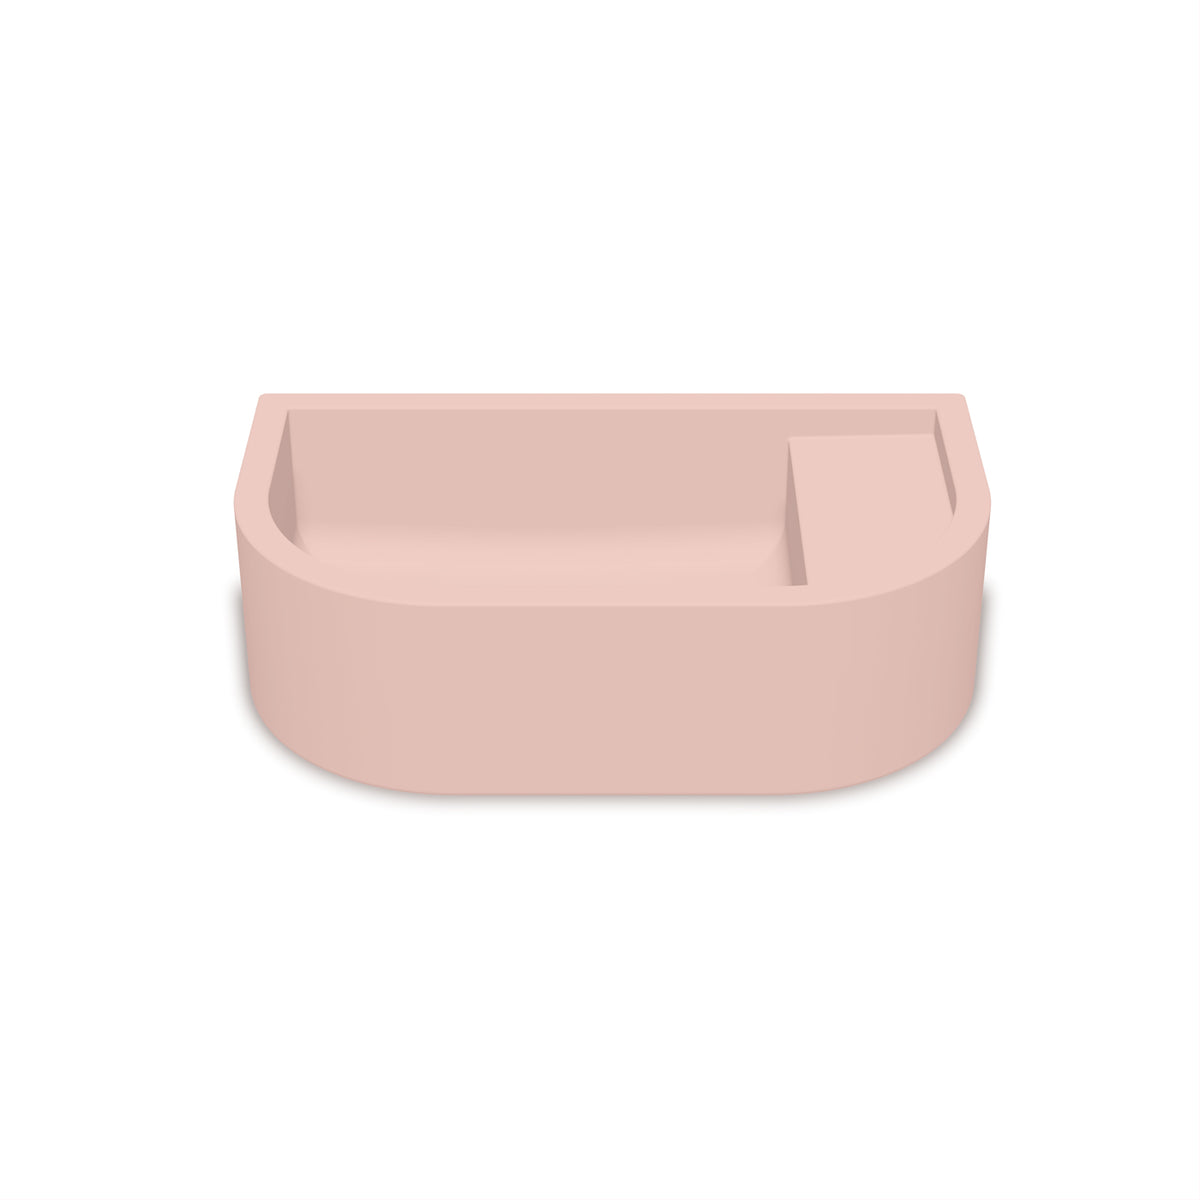 Loop 01 Basin - Overflow - Surface Mount (Blush Pink,No Tap Hole,White)